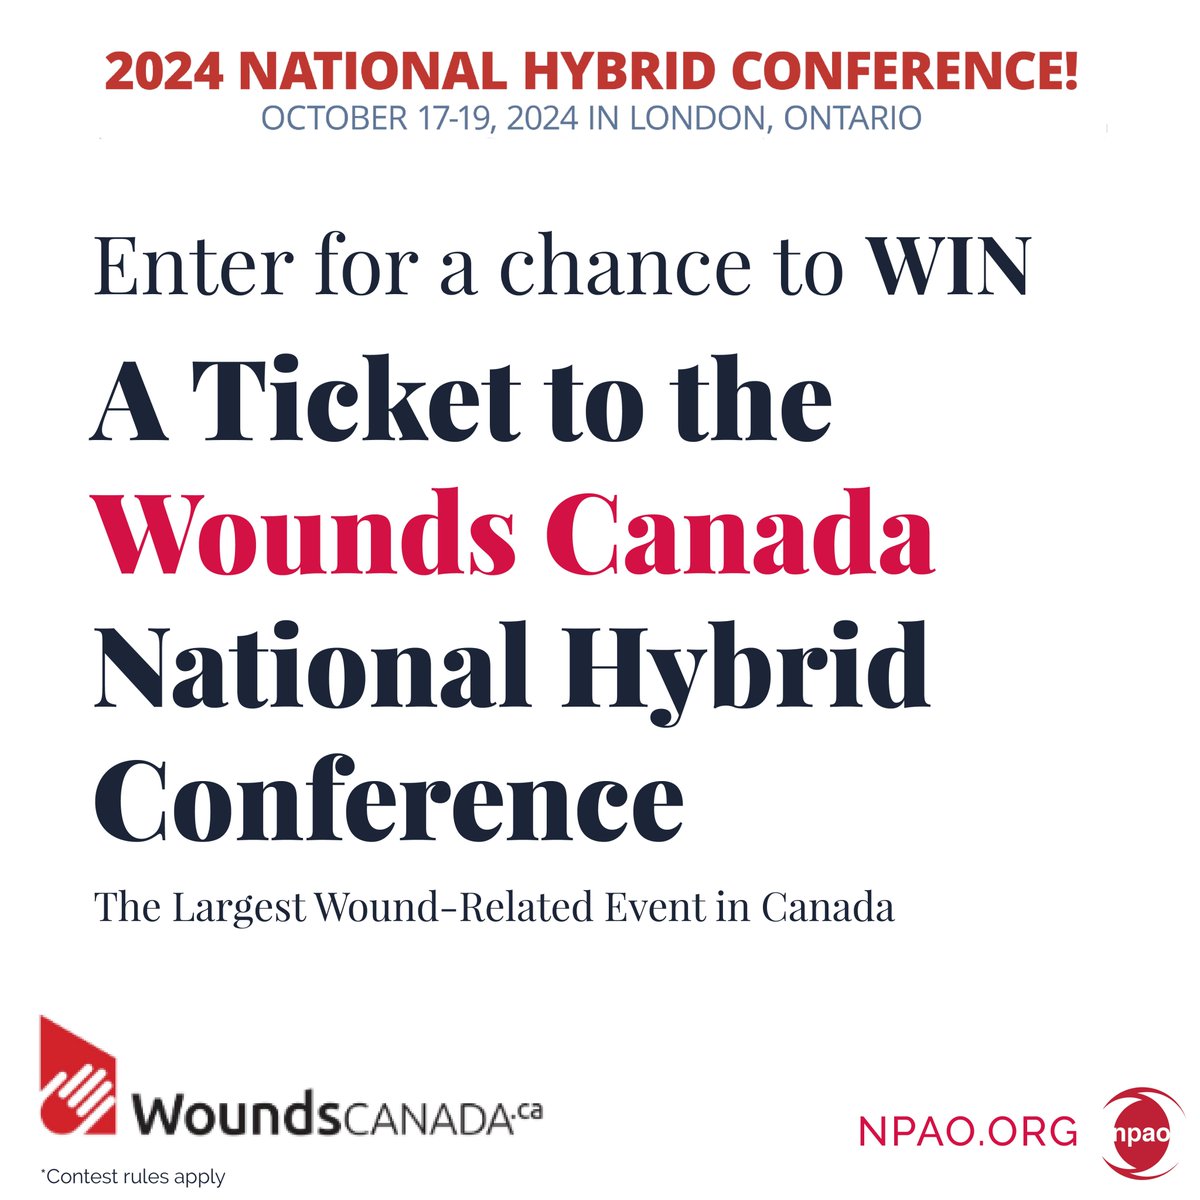 Nurses Week Contest! Showcase your wound care contributions to win a ticket to the Wounds Canada National Hybrid Conference, Oct 17-19, 2024! Share a photo, describe your NP role, and how you'll share conference takeaways. Deadline: June 7. Submit now: npao.org/wound-care-con…